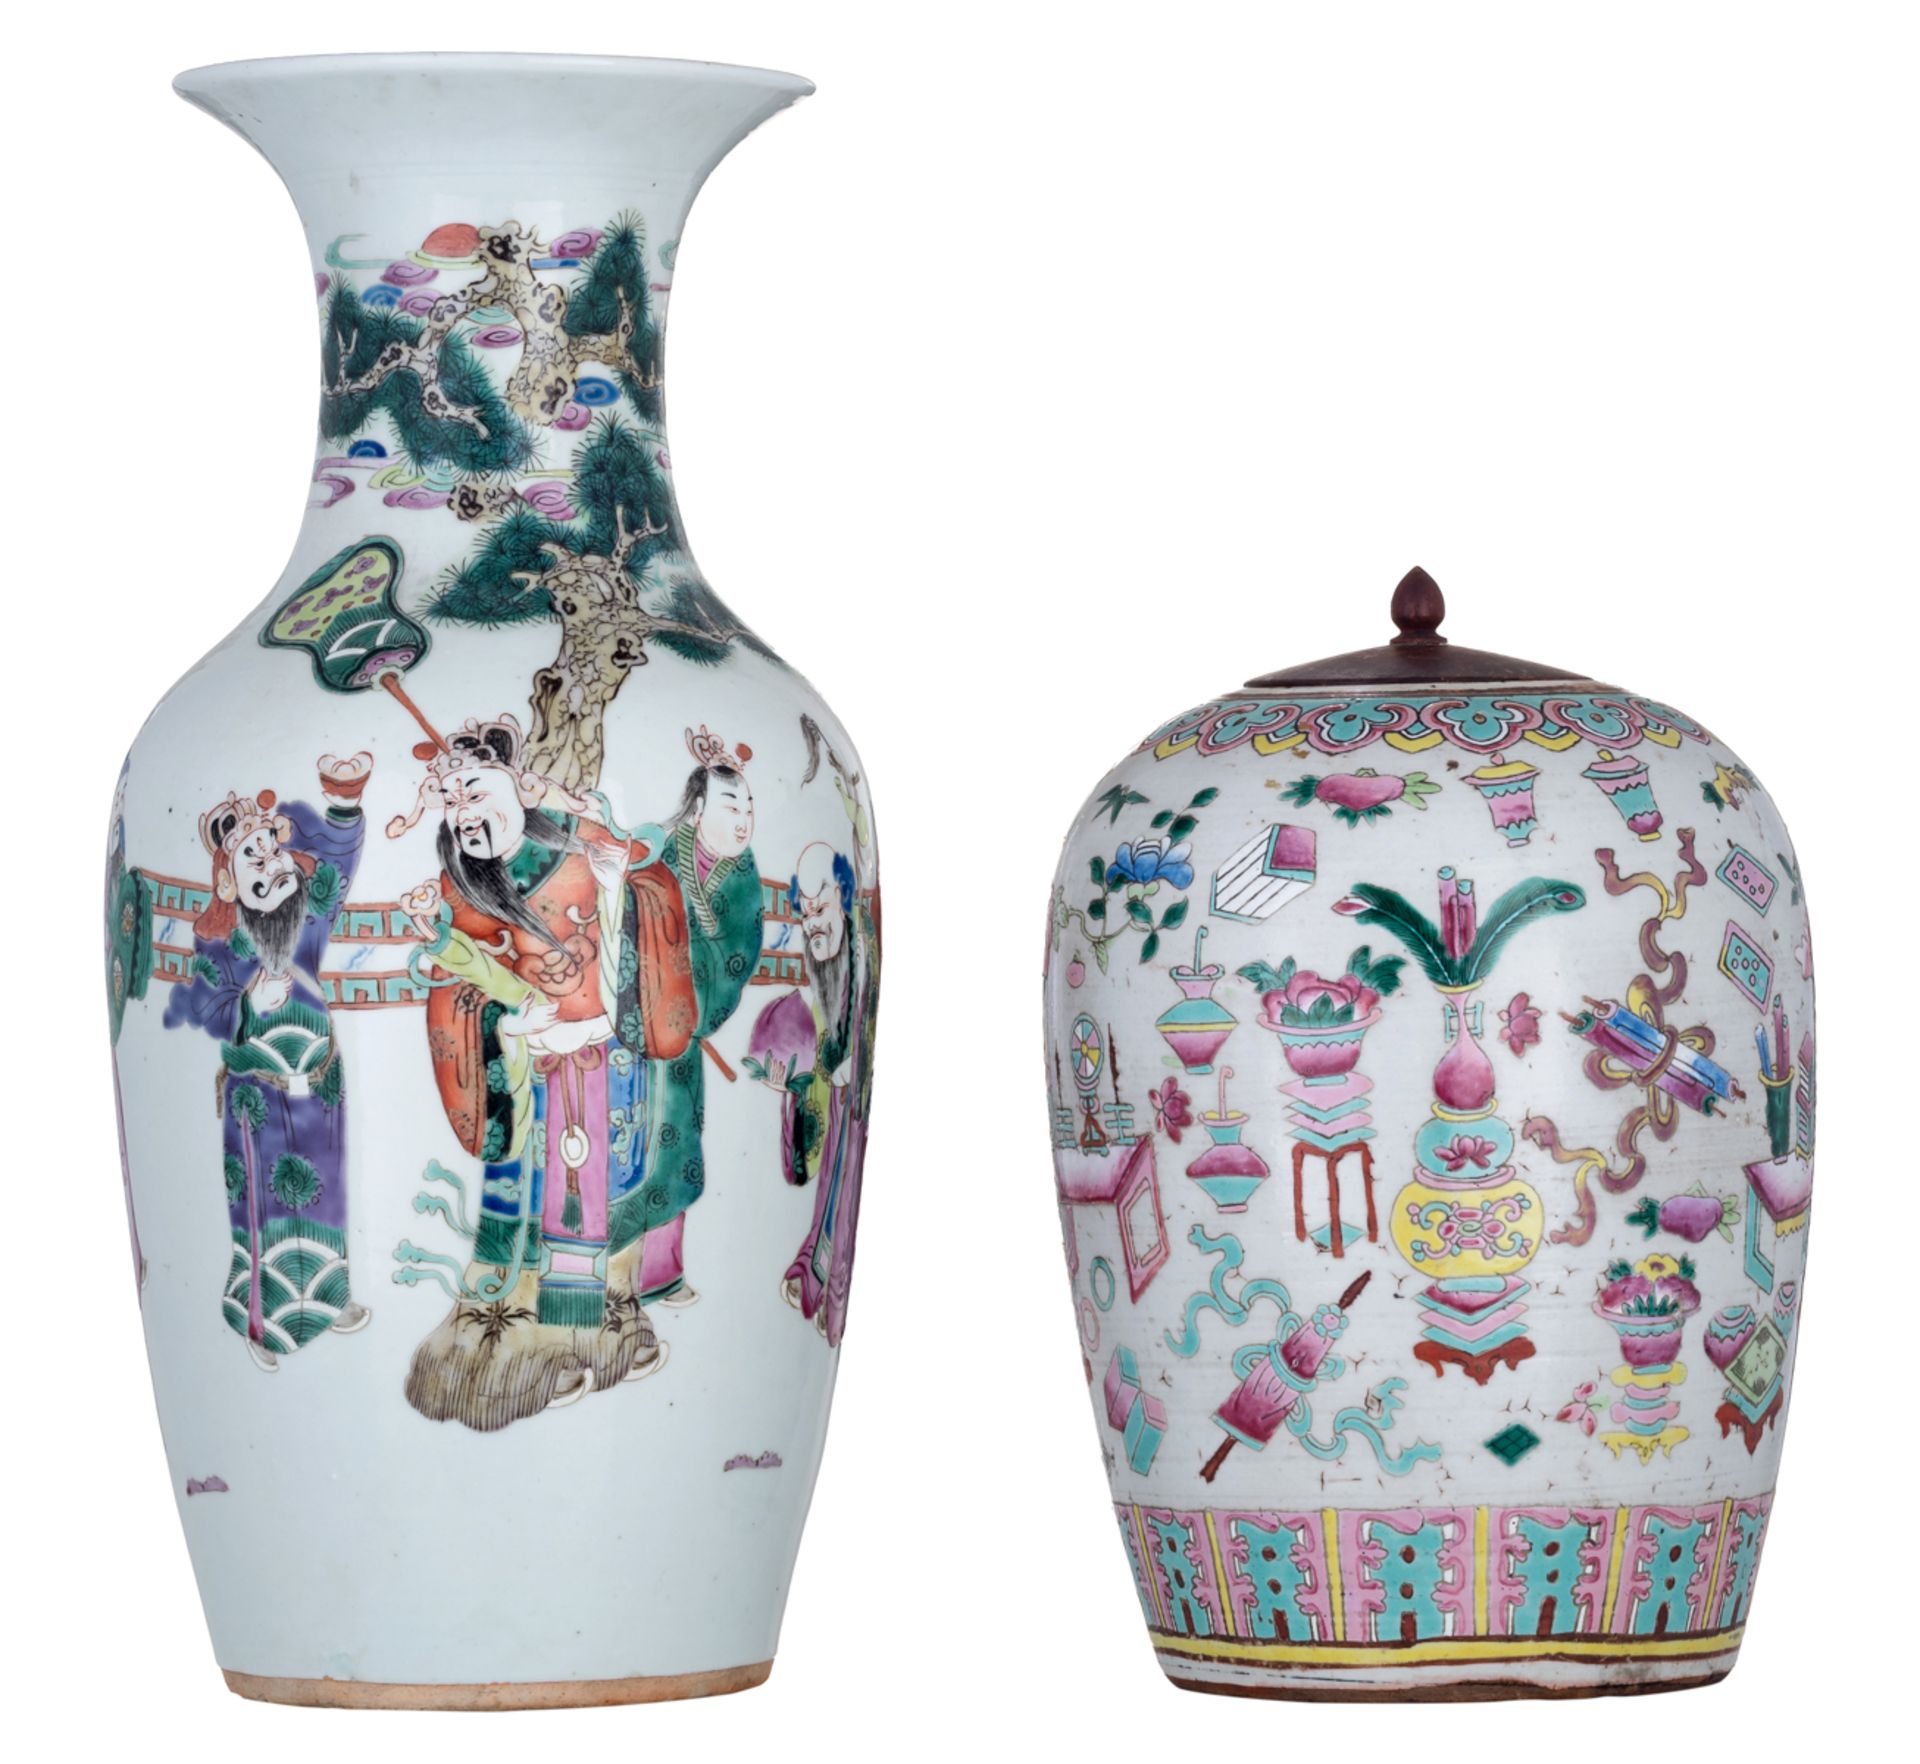 A Chinese famille rose vase, decorated with an animated scene, the back with bats and butterflies; a